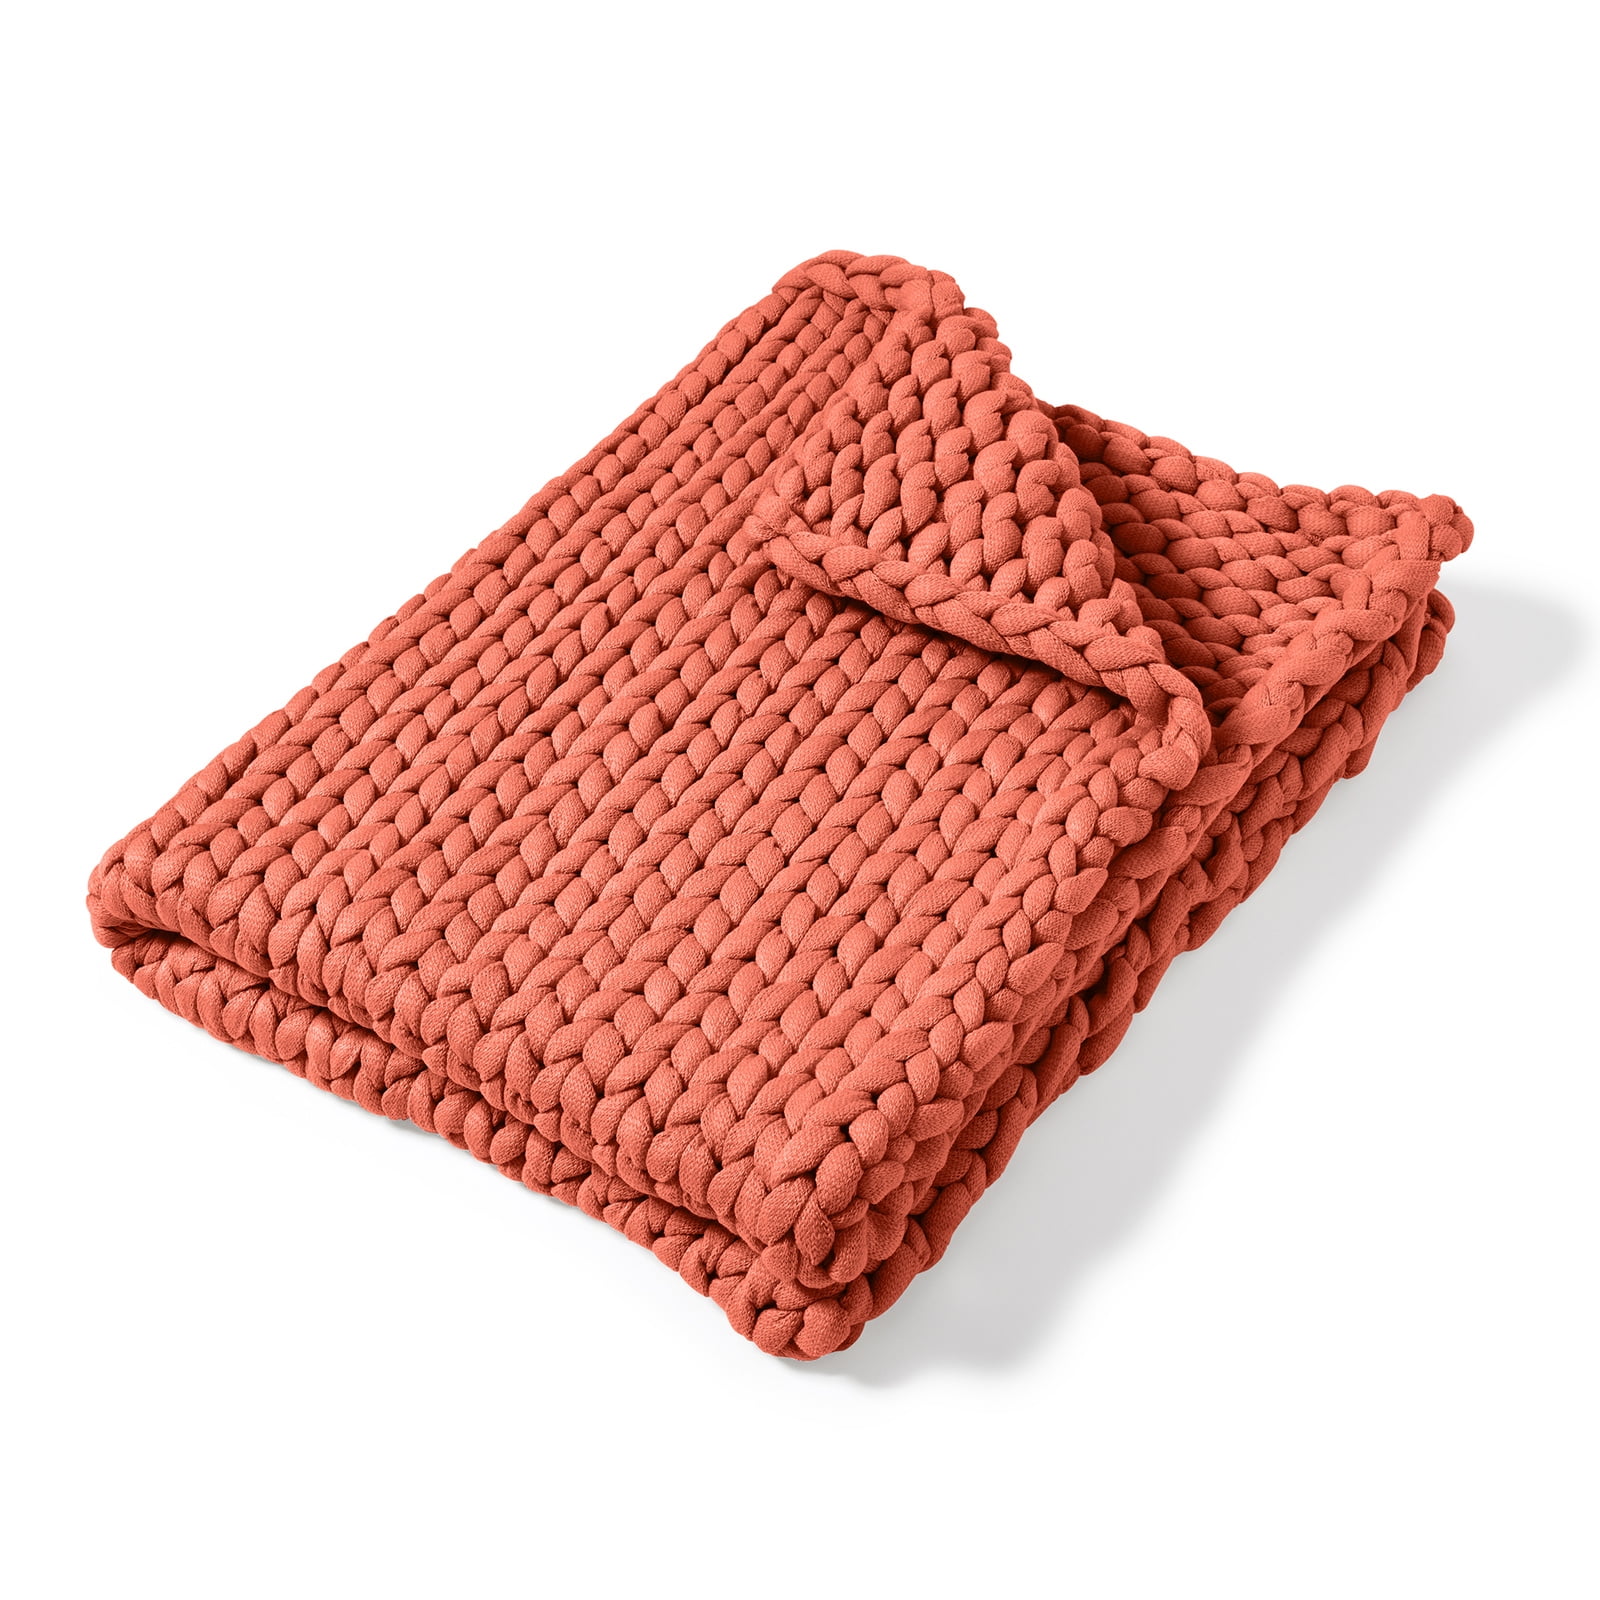 70011 40 X 50 In. Chunky Knit Throw, Coral